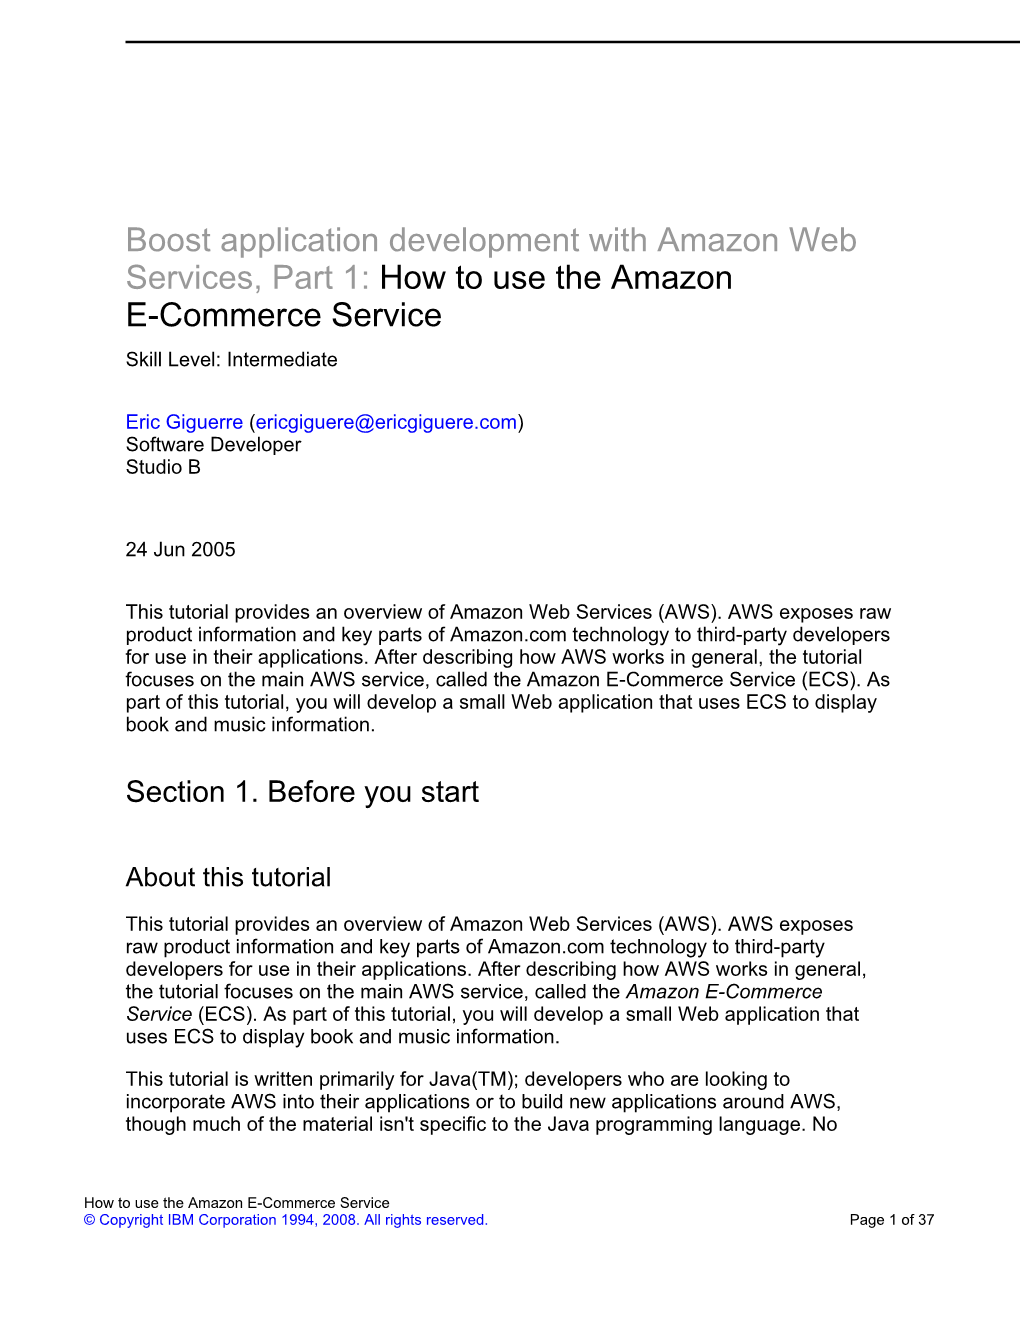 Boost Application Development with Amazon Web Services, Part 1: How to Use the Amazon E-Commerce Service Skill Level: Intermediate